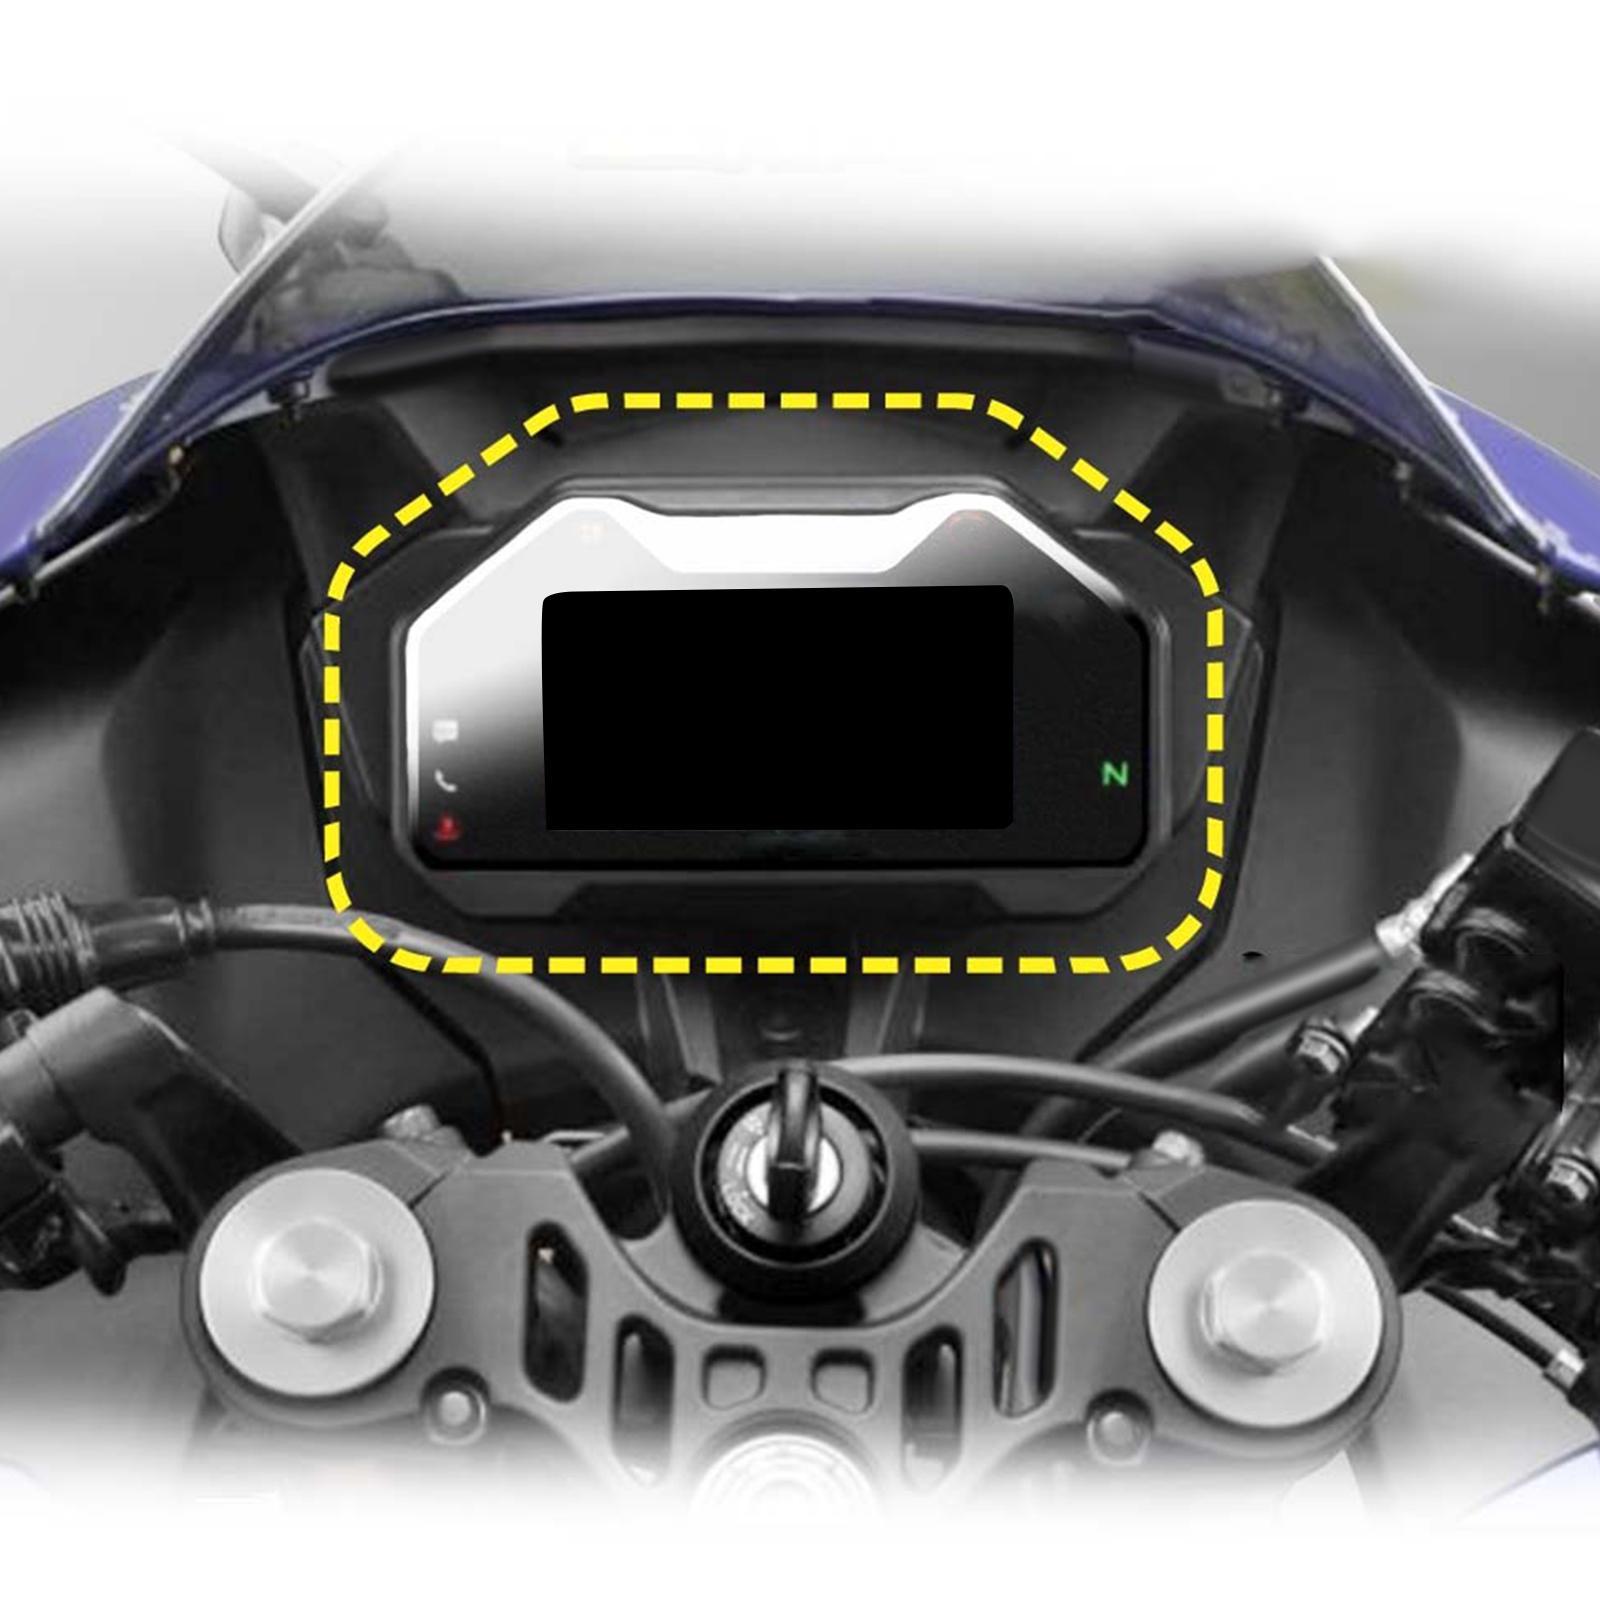 Cluster   Scratch   Protection   for         FZ09